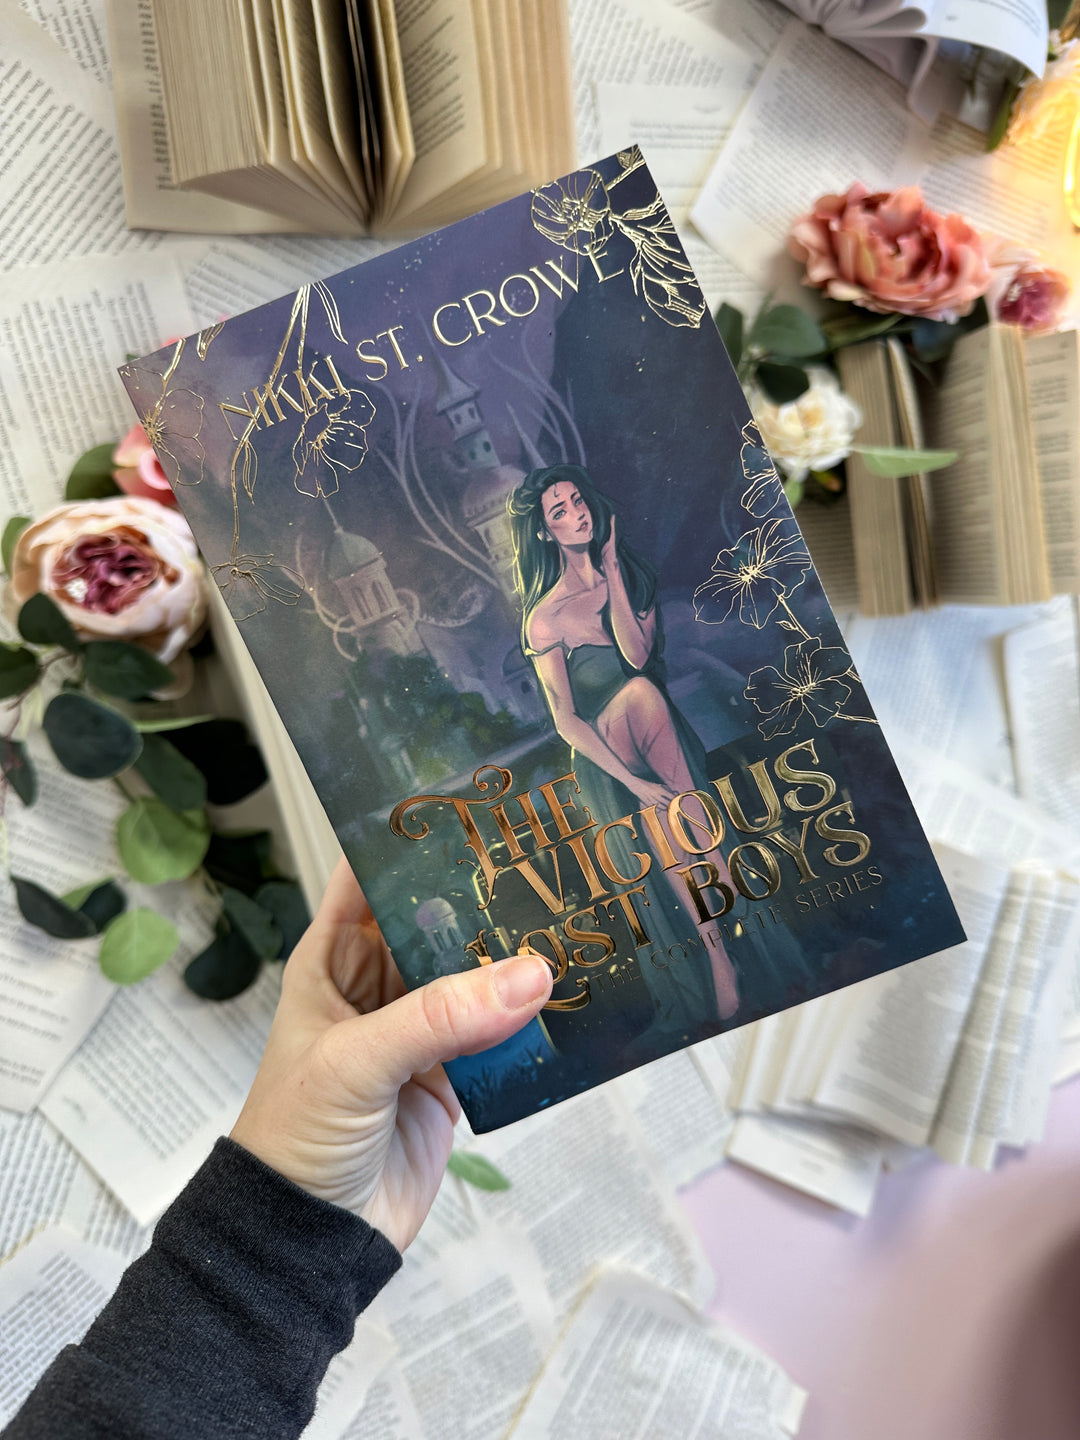 Special Edition Omnibus: The Vicious Lost Boys by Nikki St. Crowe